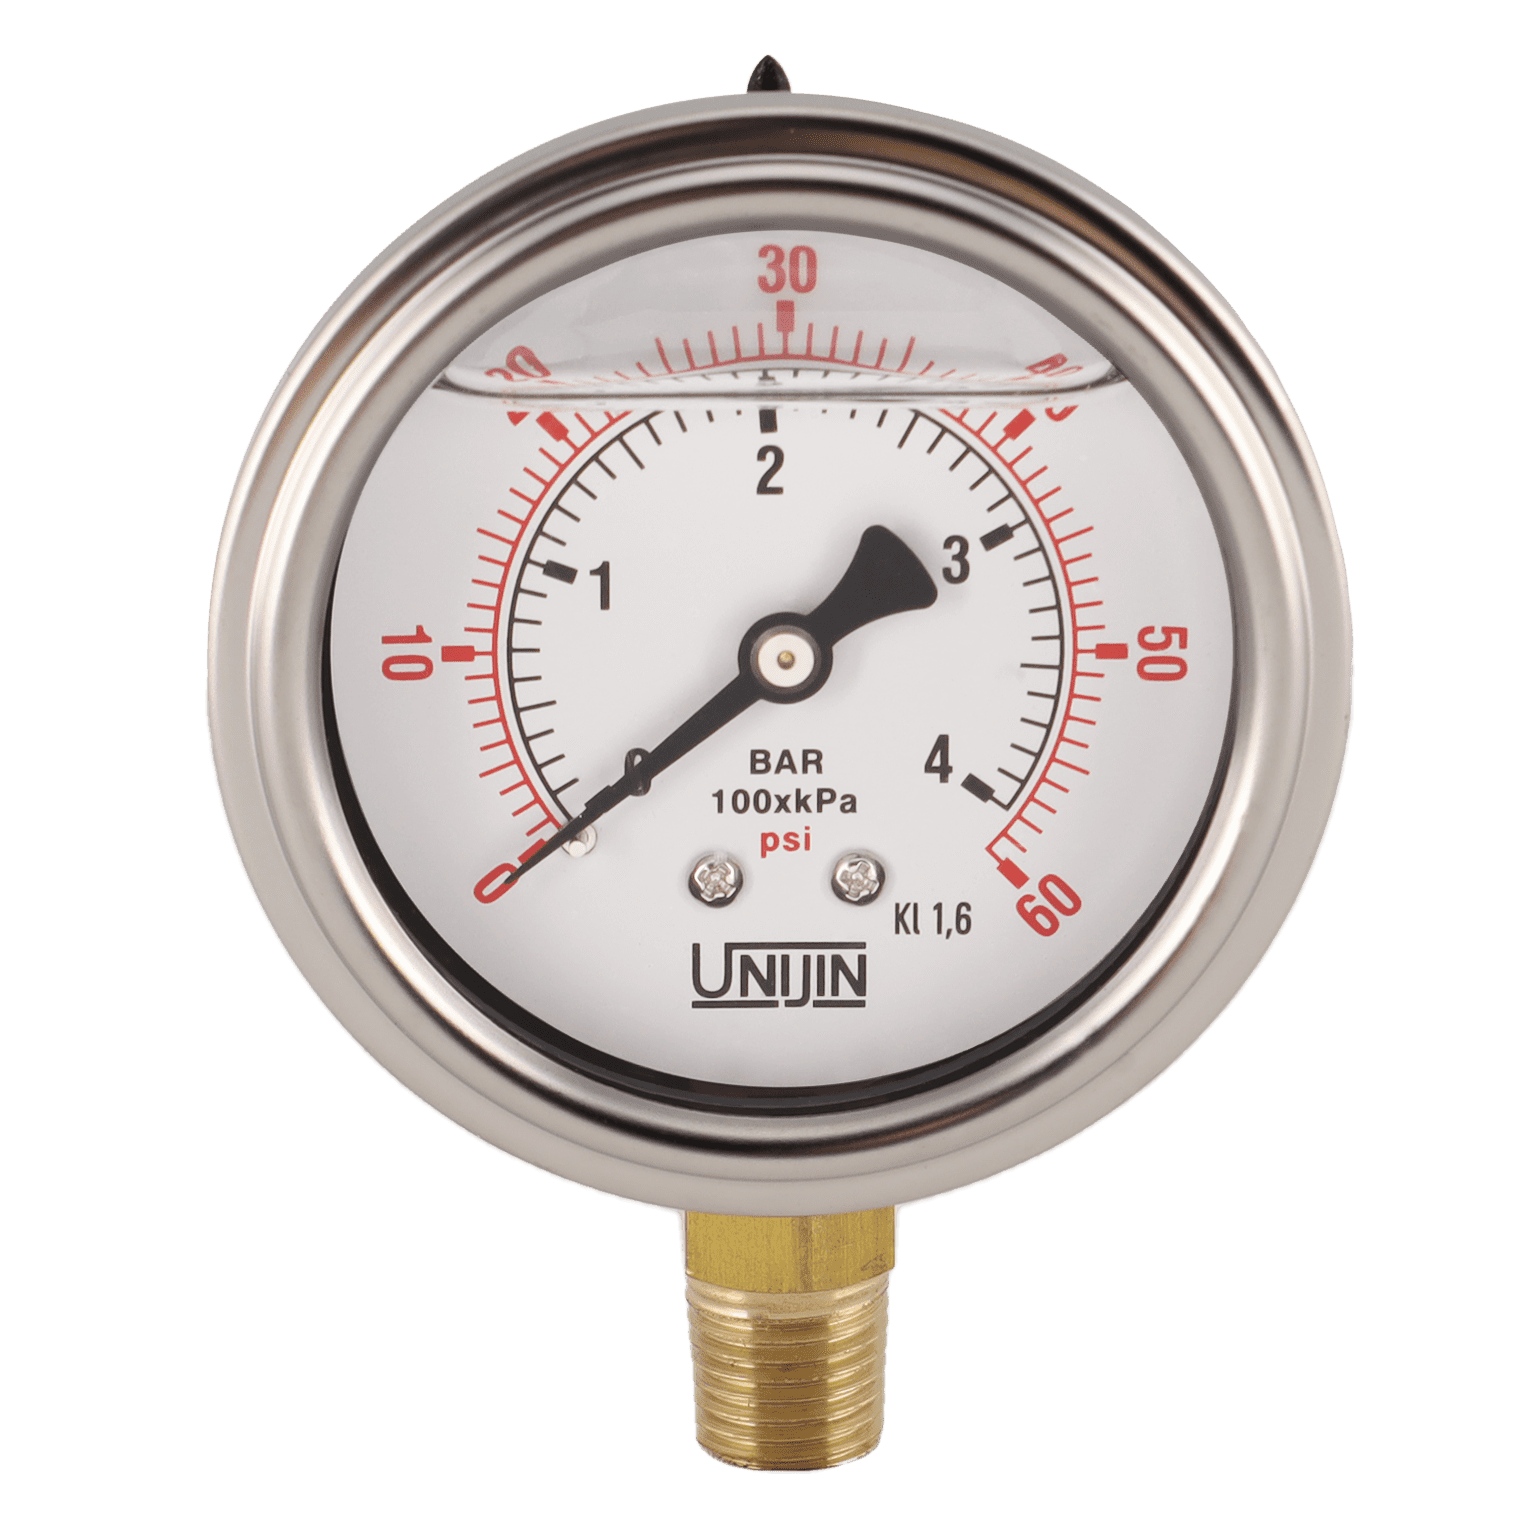 0-60Psi/kpa 3/4 FNPT Connection -3-2-3% Accuracy Measureman 2 Steel Gas Pressure Test Gauge Assembly